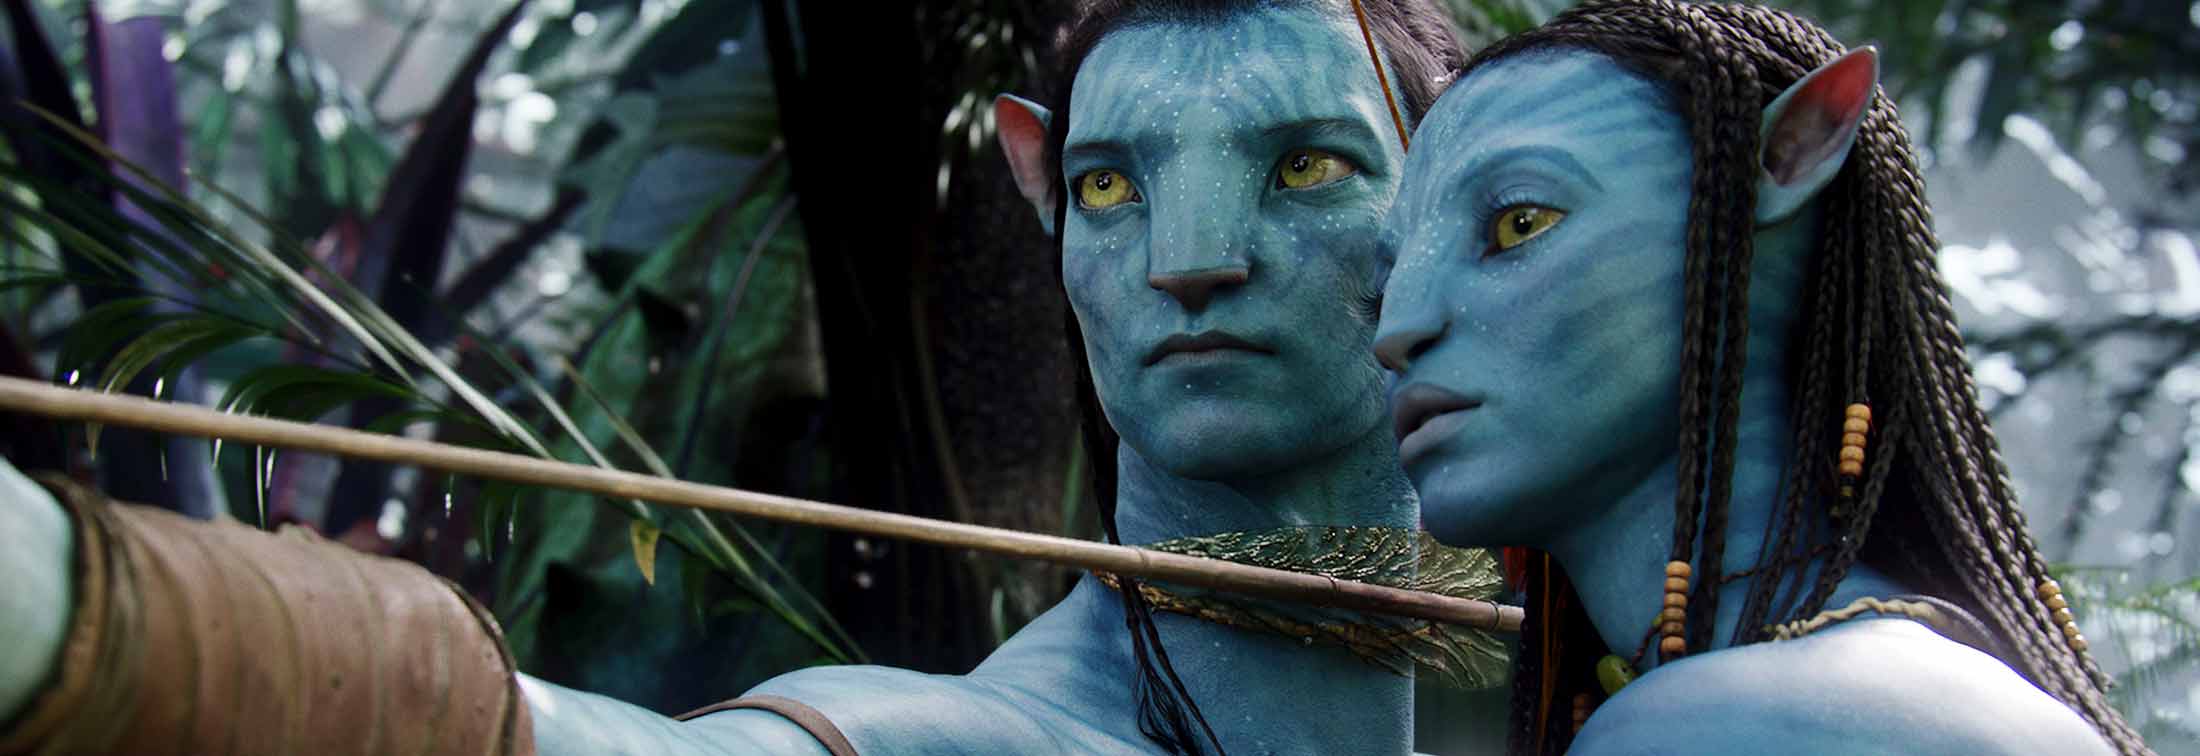 Avatar - In Defence of a cinematic landmark